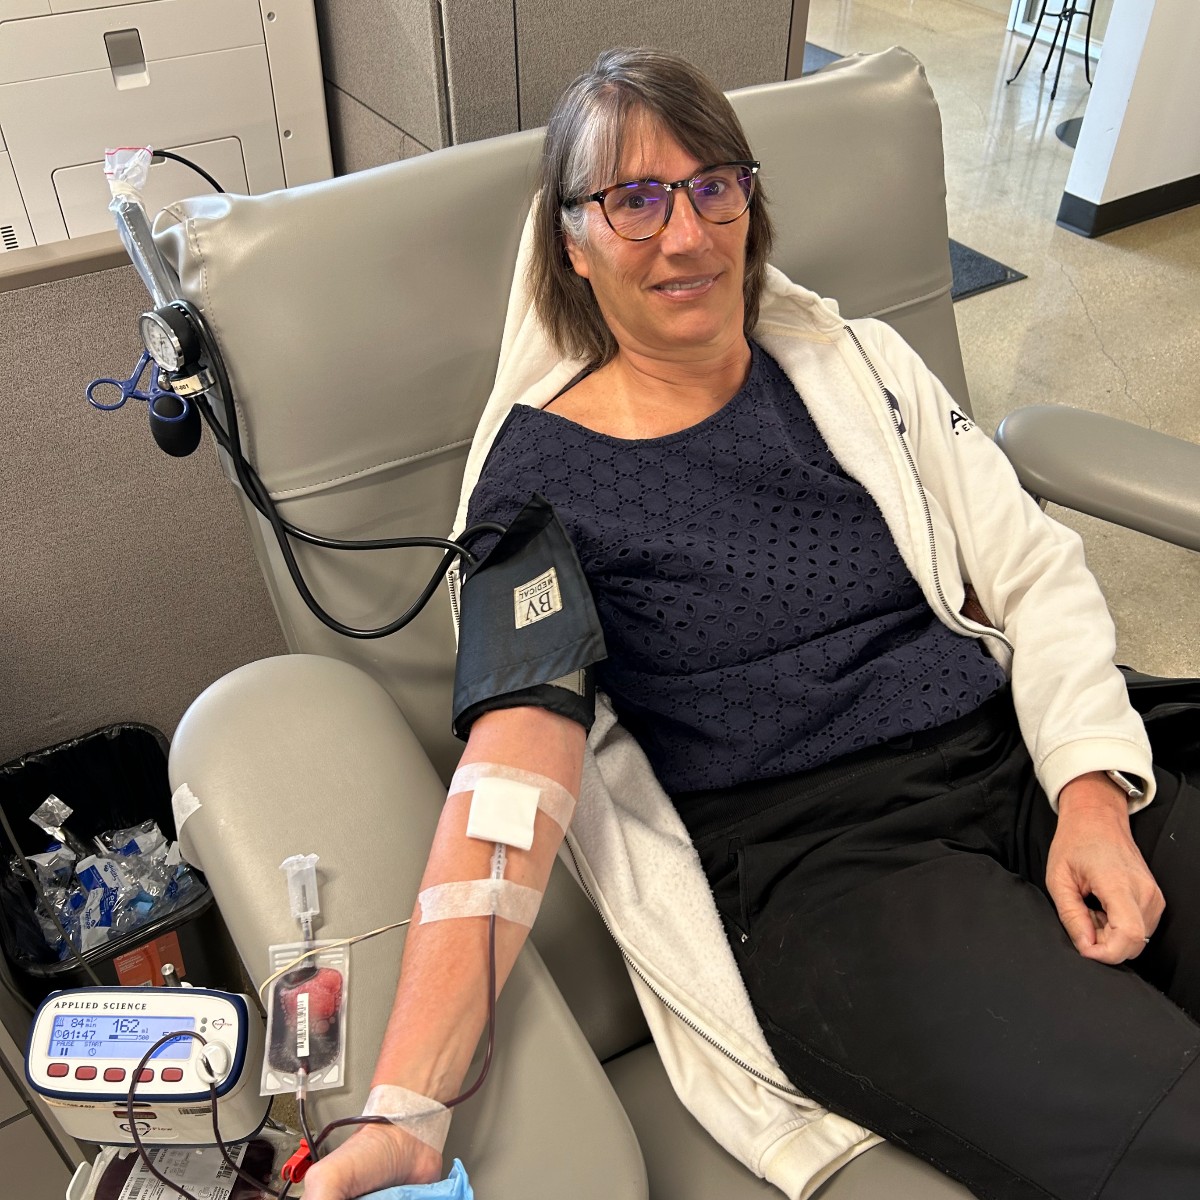 Donors have different reasons for donating blood. For Jackie, it’s simple – to honor her nephew who passed away. Thank you, Jackie, for giving the gift of life! Please share why you donate in the comments. #GIVEBLOOD #SAVELIVES